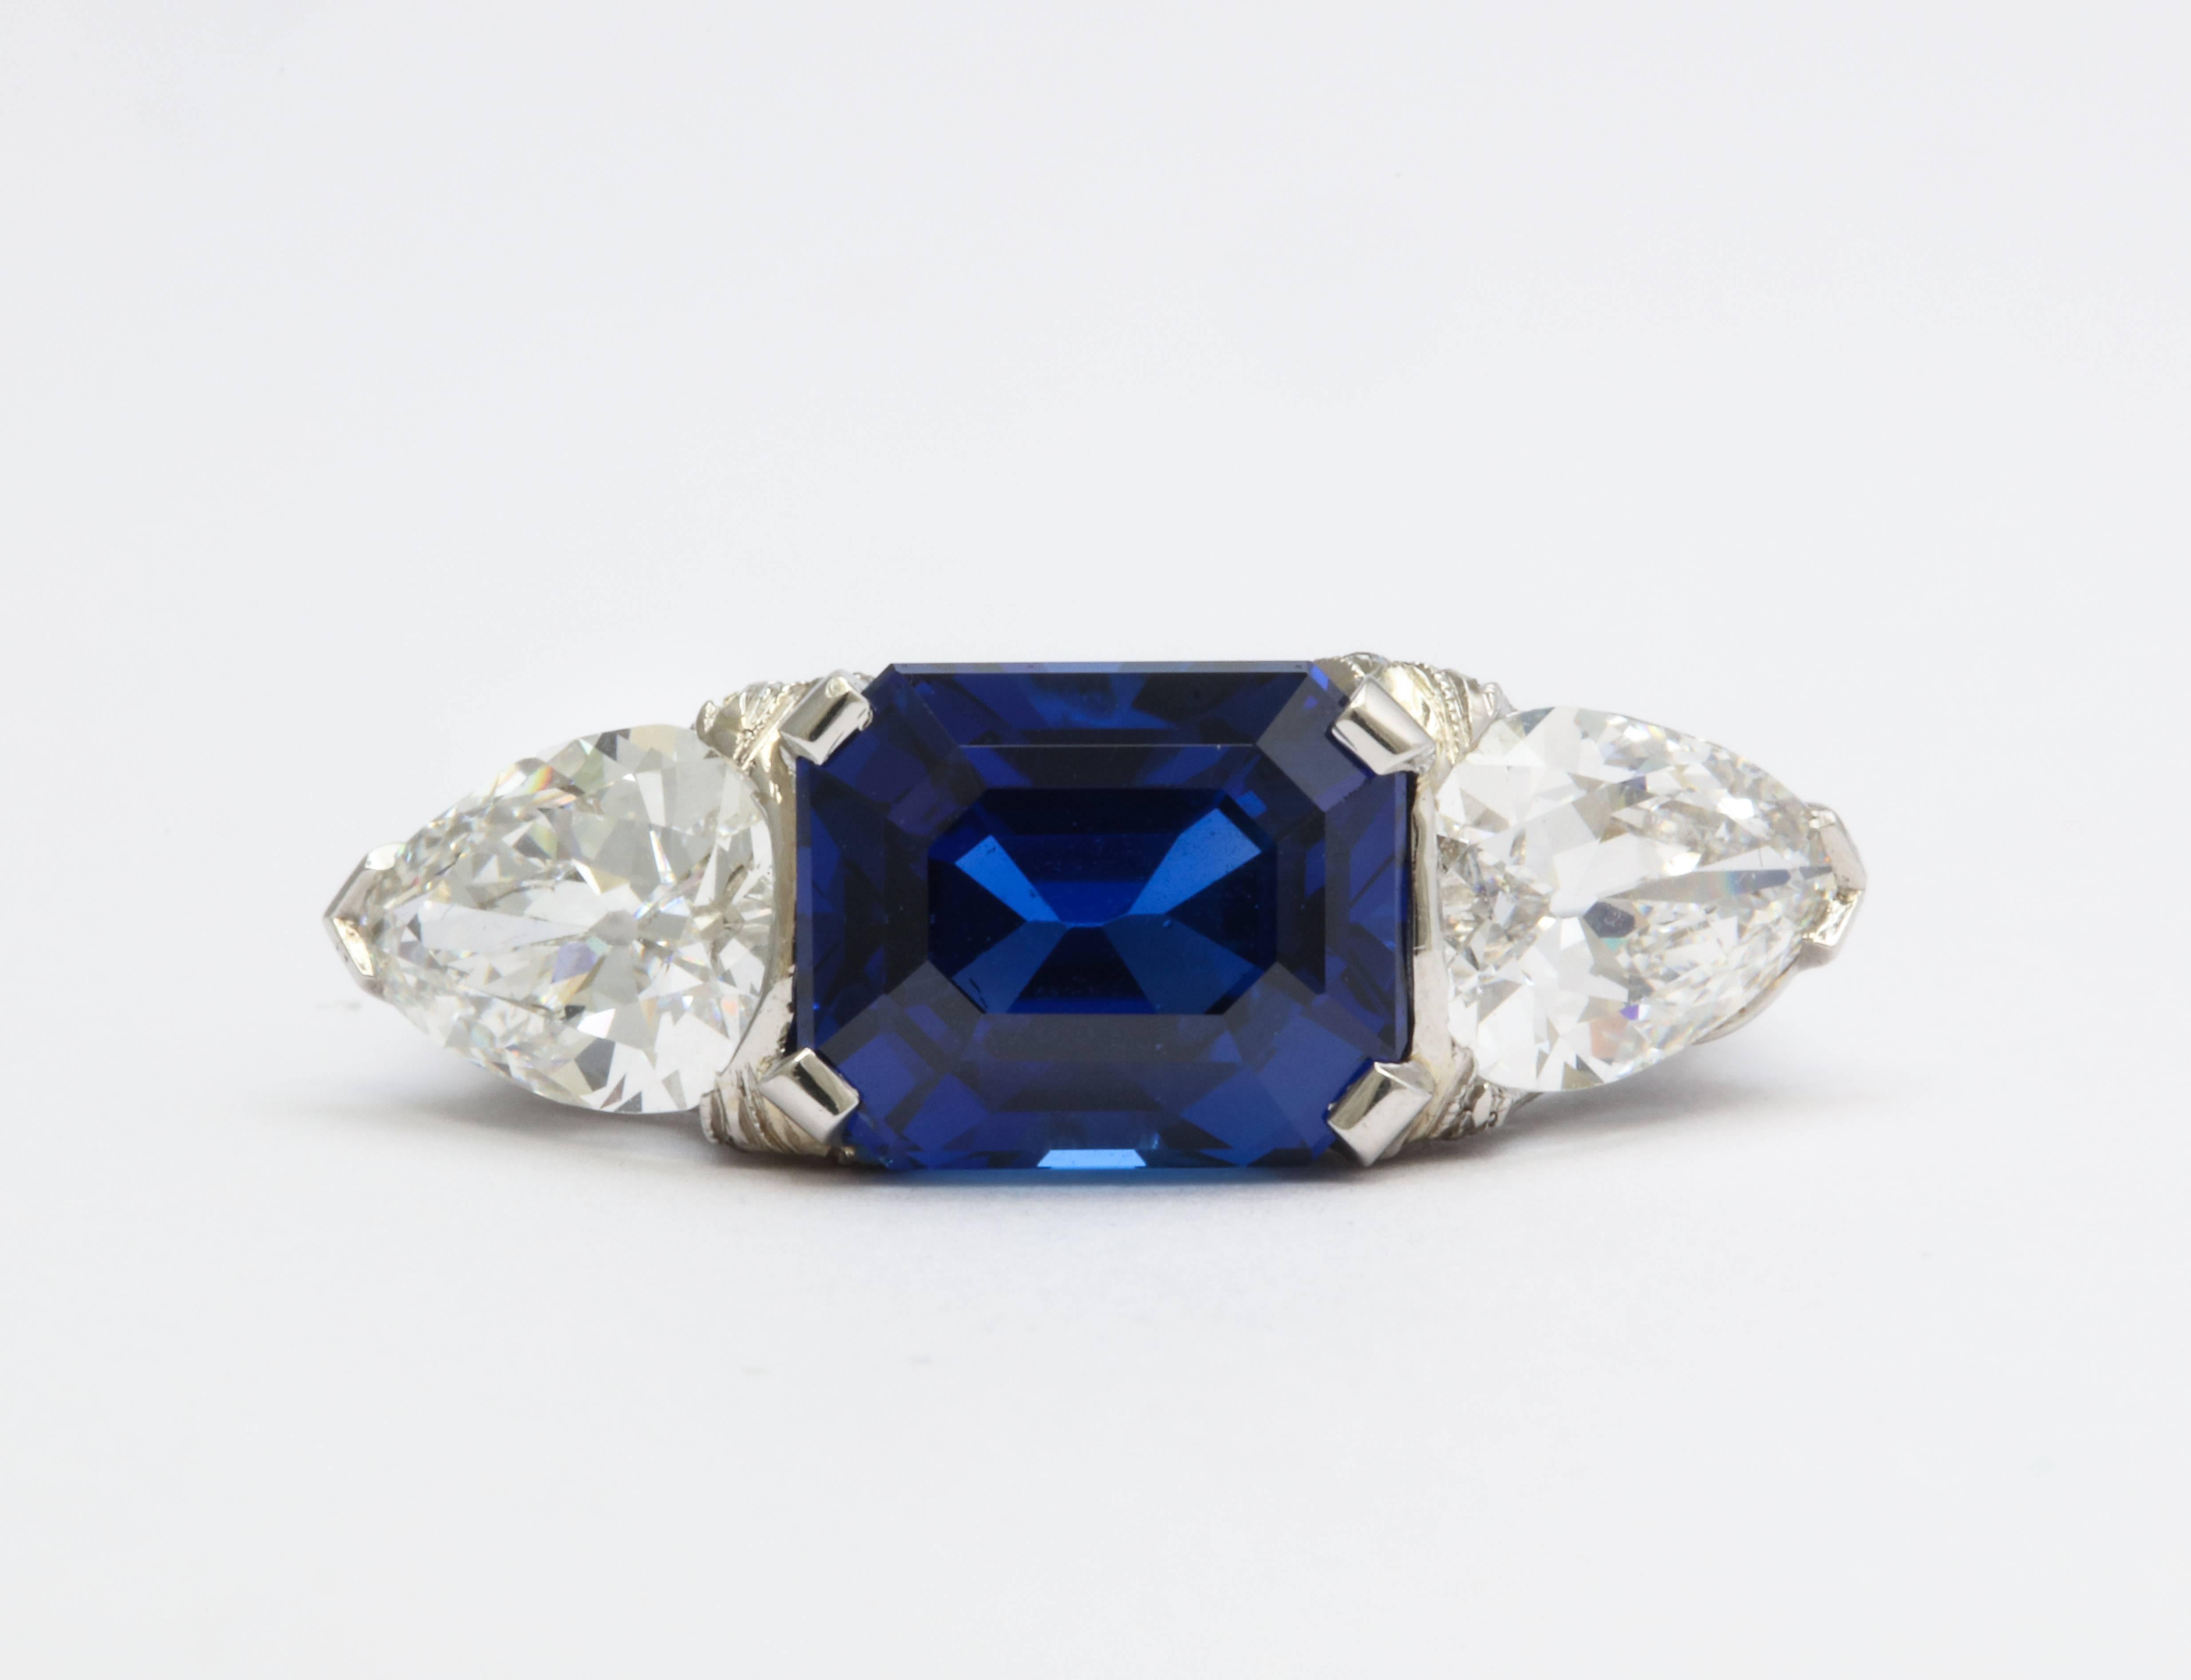 A Very Fine Tiffany and Co Burmese Sapphire and Diamond Ring

Gubelin certified 4.65 carat sapphire that is natural/unheated and has a Burmese origin. Also has been certified as being "Royal Blue"  

With crystal clear clarity. A